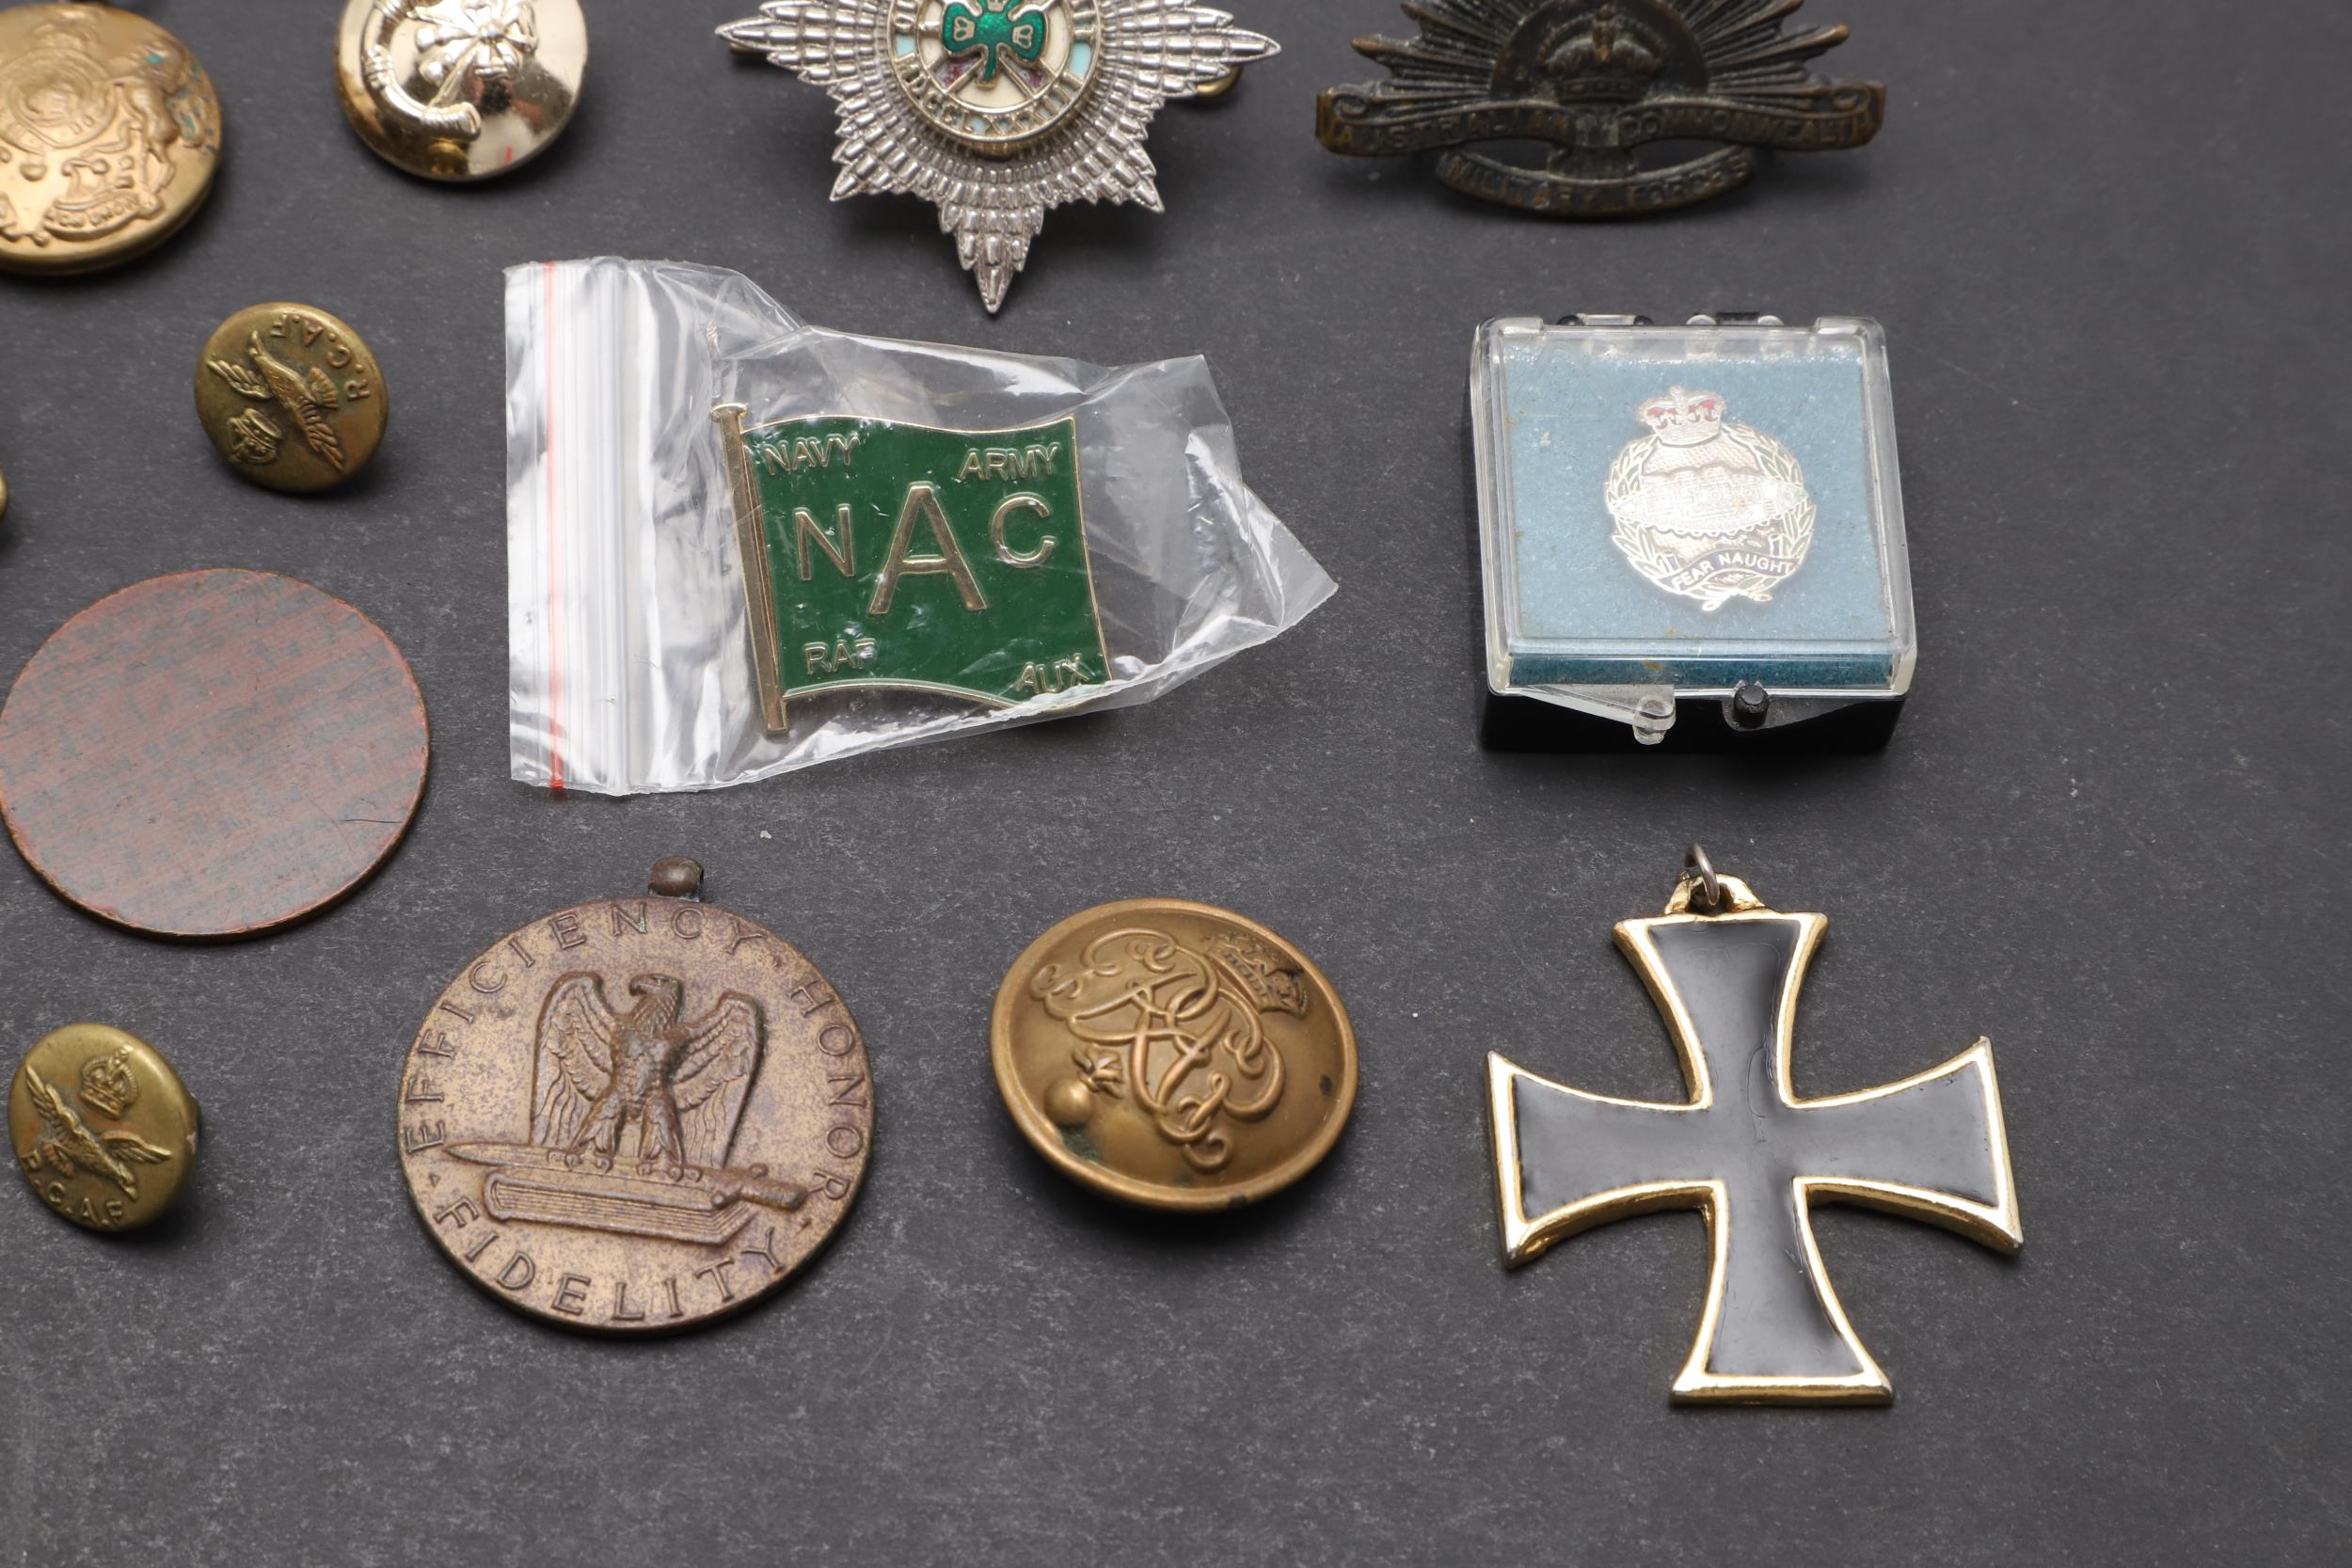 AN INTERESTING COLLECTION OF MILITARY BADGES, BUTTONS AND INSIGNIA. - Image 8 of 9